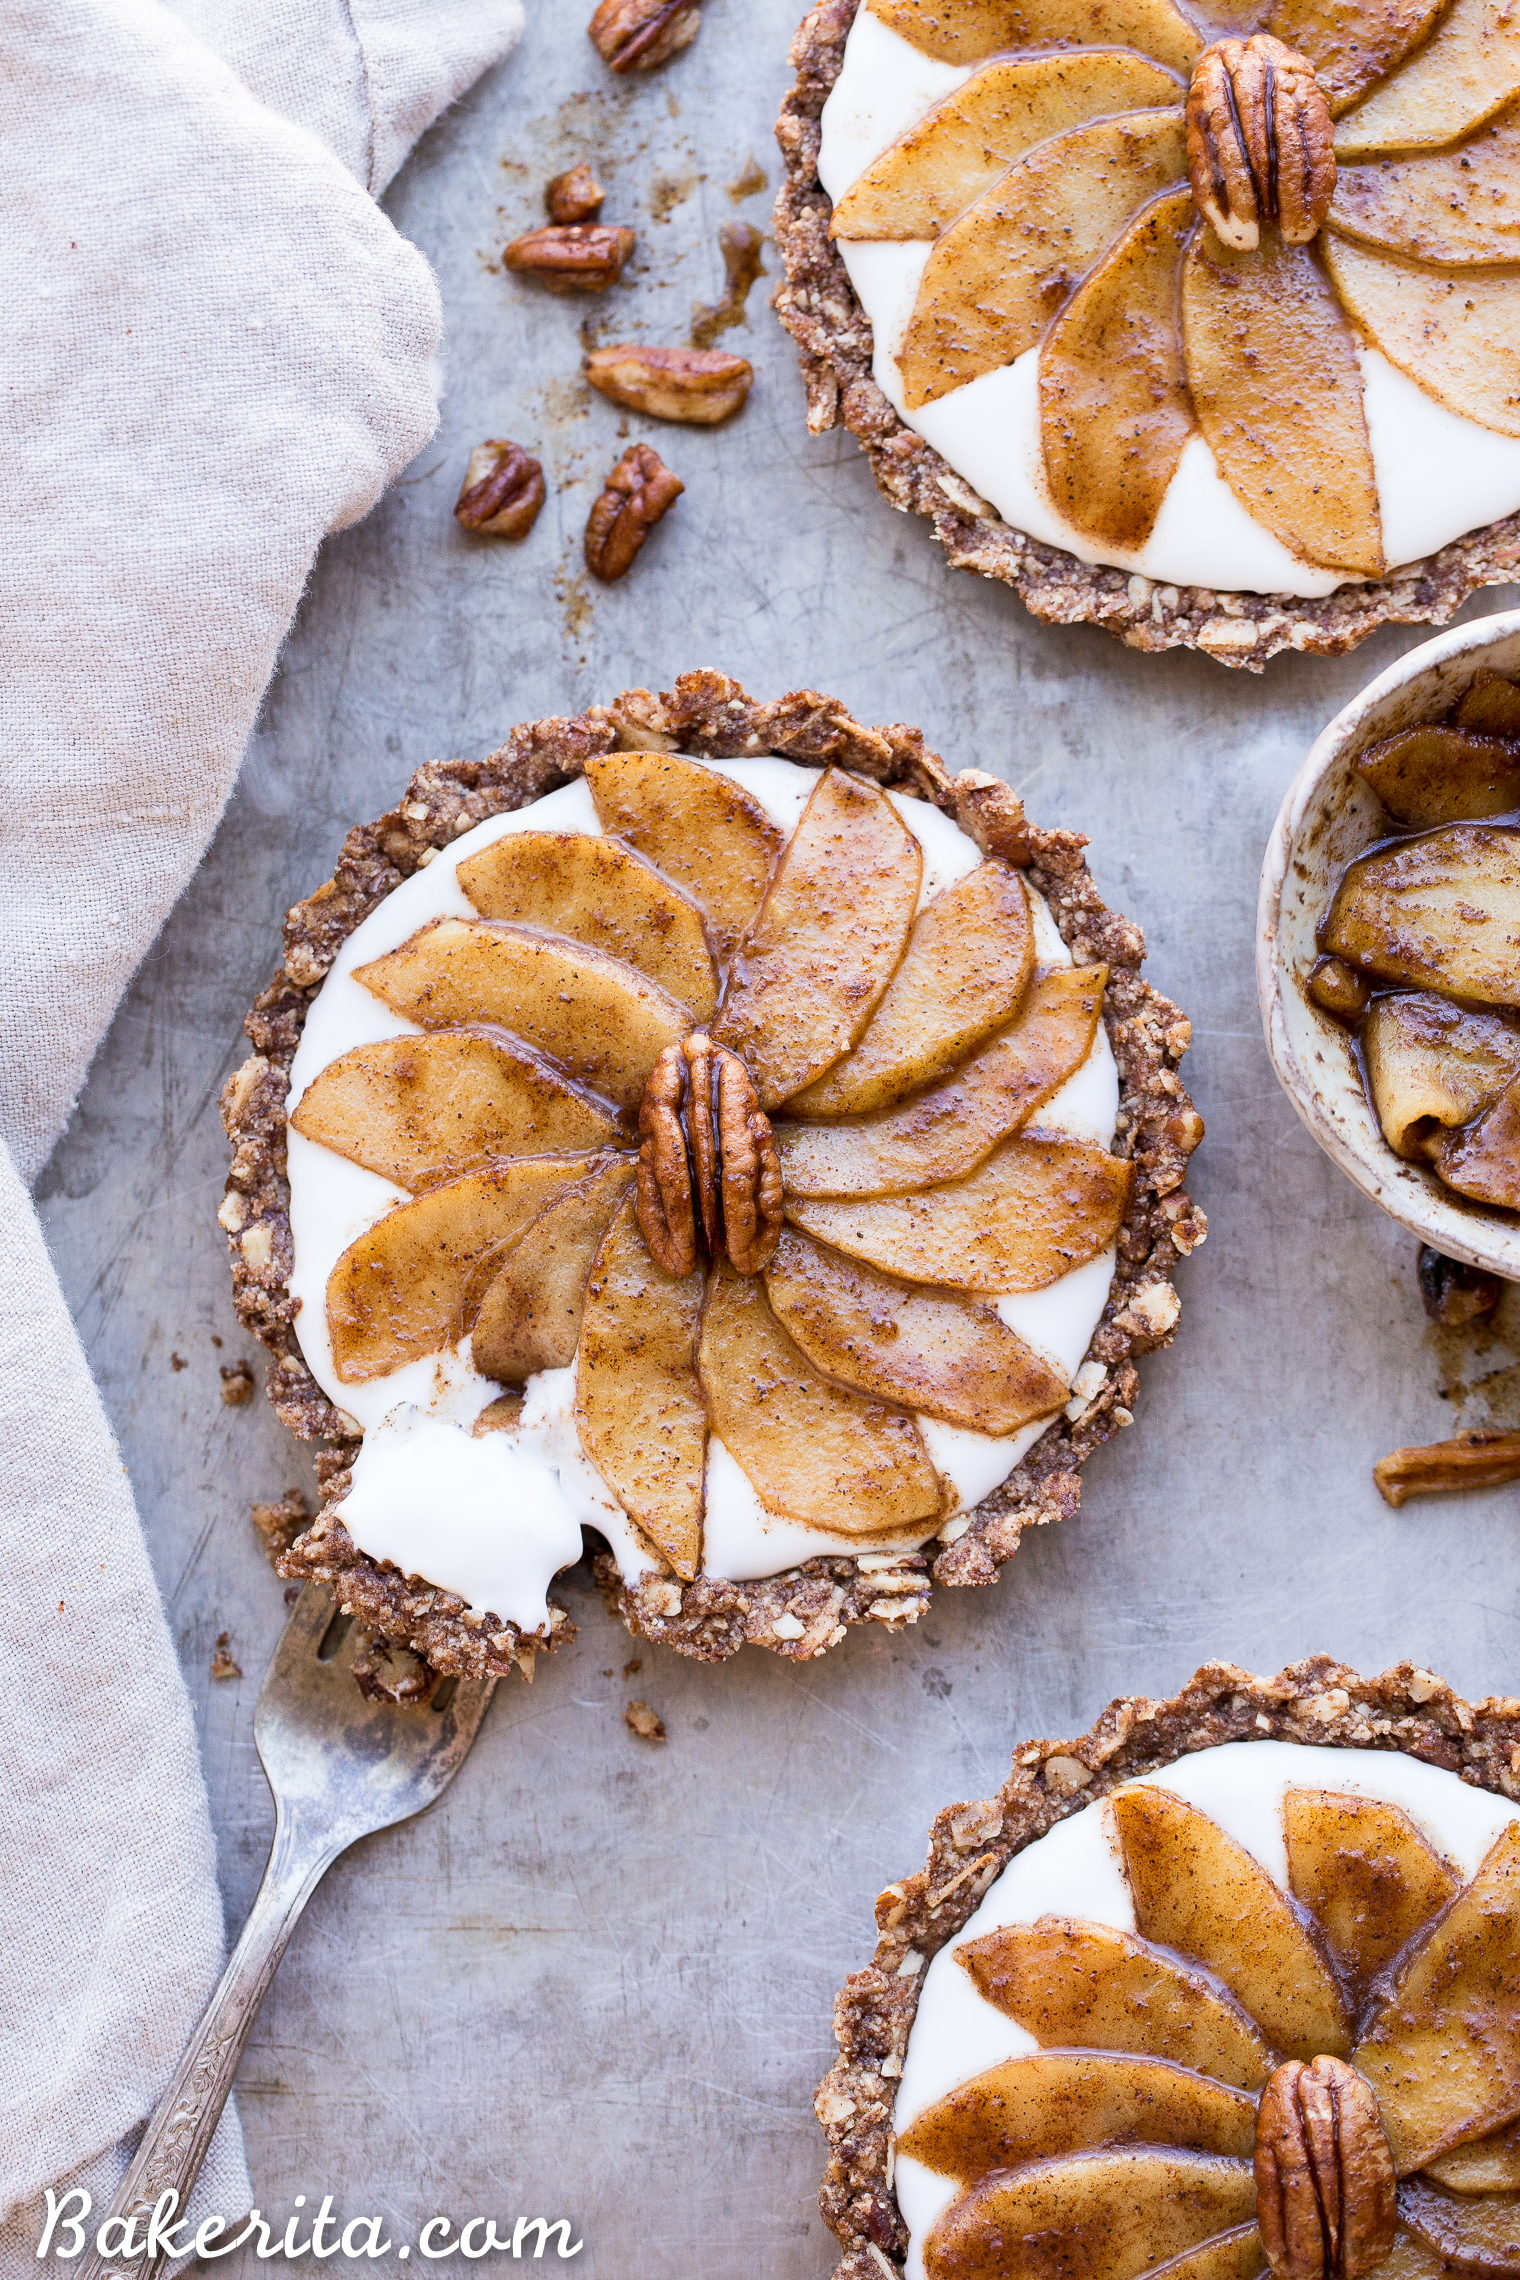 These Granola Breakfast Tarts with Sauteed Apples + Coconut Yogurt are an incredible breakfast treat that's so good, you'll think it's dessert! The granola crust is spread with creamy dairy-free coconut yogurt and topped with cinnamon sauteed apples. This gluten-free, paleo and vegan breakfast is the perfect holiday morning breakfast, or to make any morning more special.